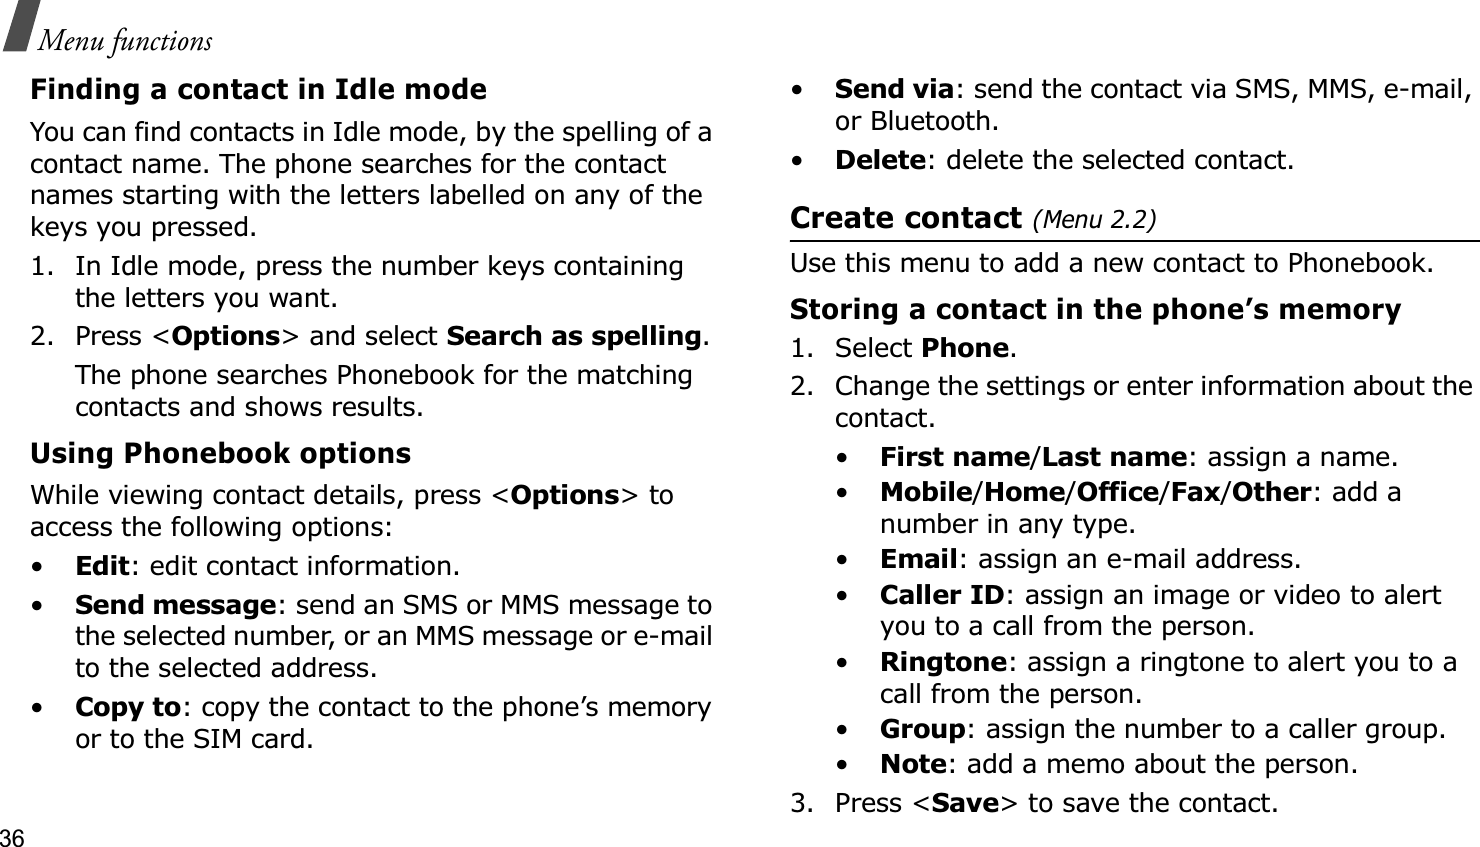 36Menu functionsFinding a contact in Idle modeYou can find contacts in Idle mode, by the spelling of a contact name. The phone searches for the contact names starting with the letters labelled on any of the keys you pressed.1. In Idle mode, press the number keys containing the letters you want.2. Press &lt;Options&gt; and select Search as spelling.The phone searches Phonebook for the matching contacts and shows results.Using Phonebook optionsWhile viewing contact details, press &lt;Options&gt; to access the following options:•Edit: edit contact information.•Send message: send an SMS or MMS message to the selected number, or an MMS message or e-mail to the selected address.•Copy to: copy the contact to the phone’s memory or to the SIM card.•Send via: send the contact via SMS, MMS, e-mail, or Bluetooth. •Delete: delete the selected contact.Create contact (Menu 2.2)Use this menu to add a new contact to Phonebook.Storing a contact in the phone’s memory1. Select Phone.2. Change the settings or enter information about the contact.•First name/Last name: assign a name.•Mobile/Home/Office/Fax/Other: add a number in any type.•Email: assign an e-mail address.•Caller ID: assign an image or video to alert you to a call from the person.•Ringtone: assign a ringtone to alert you to a call from the person.•Group: assign the number to a caller group.•Note: add a memo about the person.3. Press &lt;Save&gt; to save the contact.